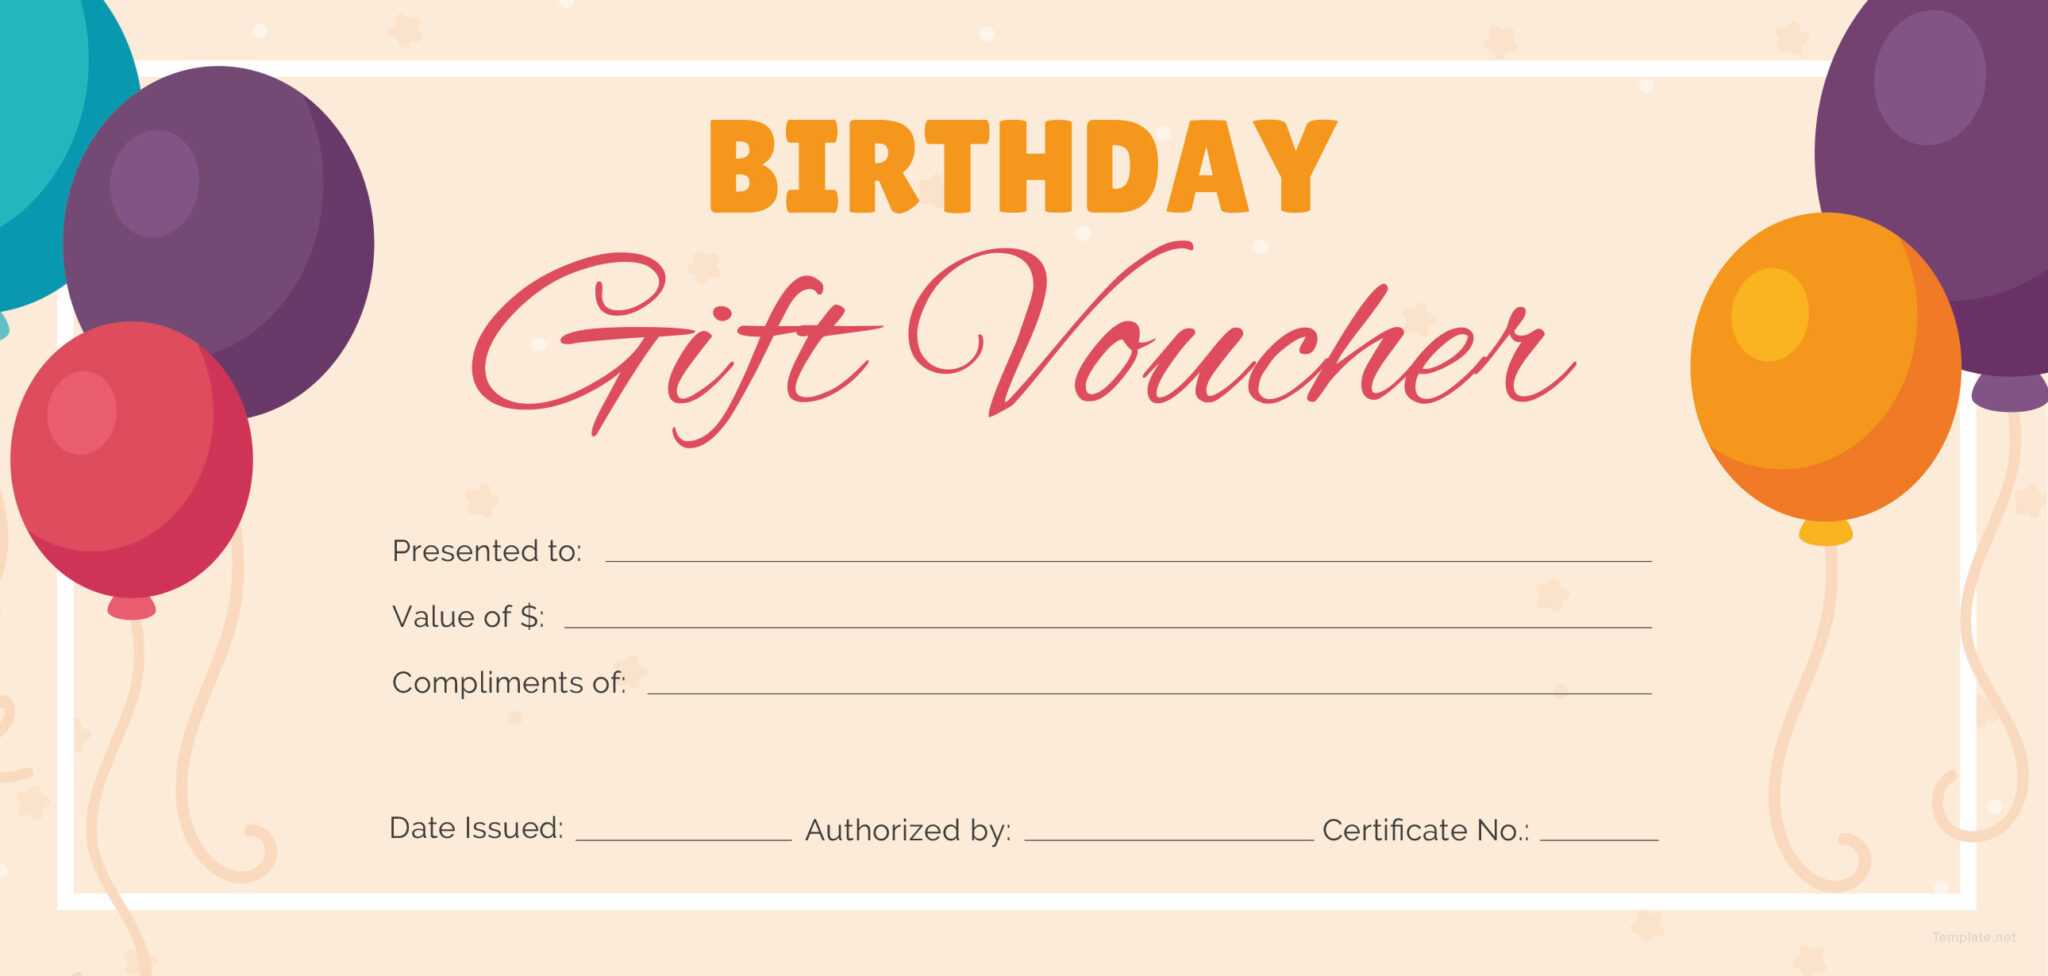 birthday-gift-certificate-template-free-printable-throughout-printable-gift-certificates